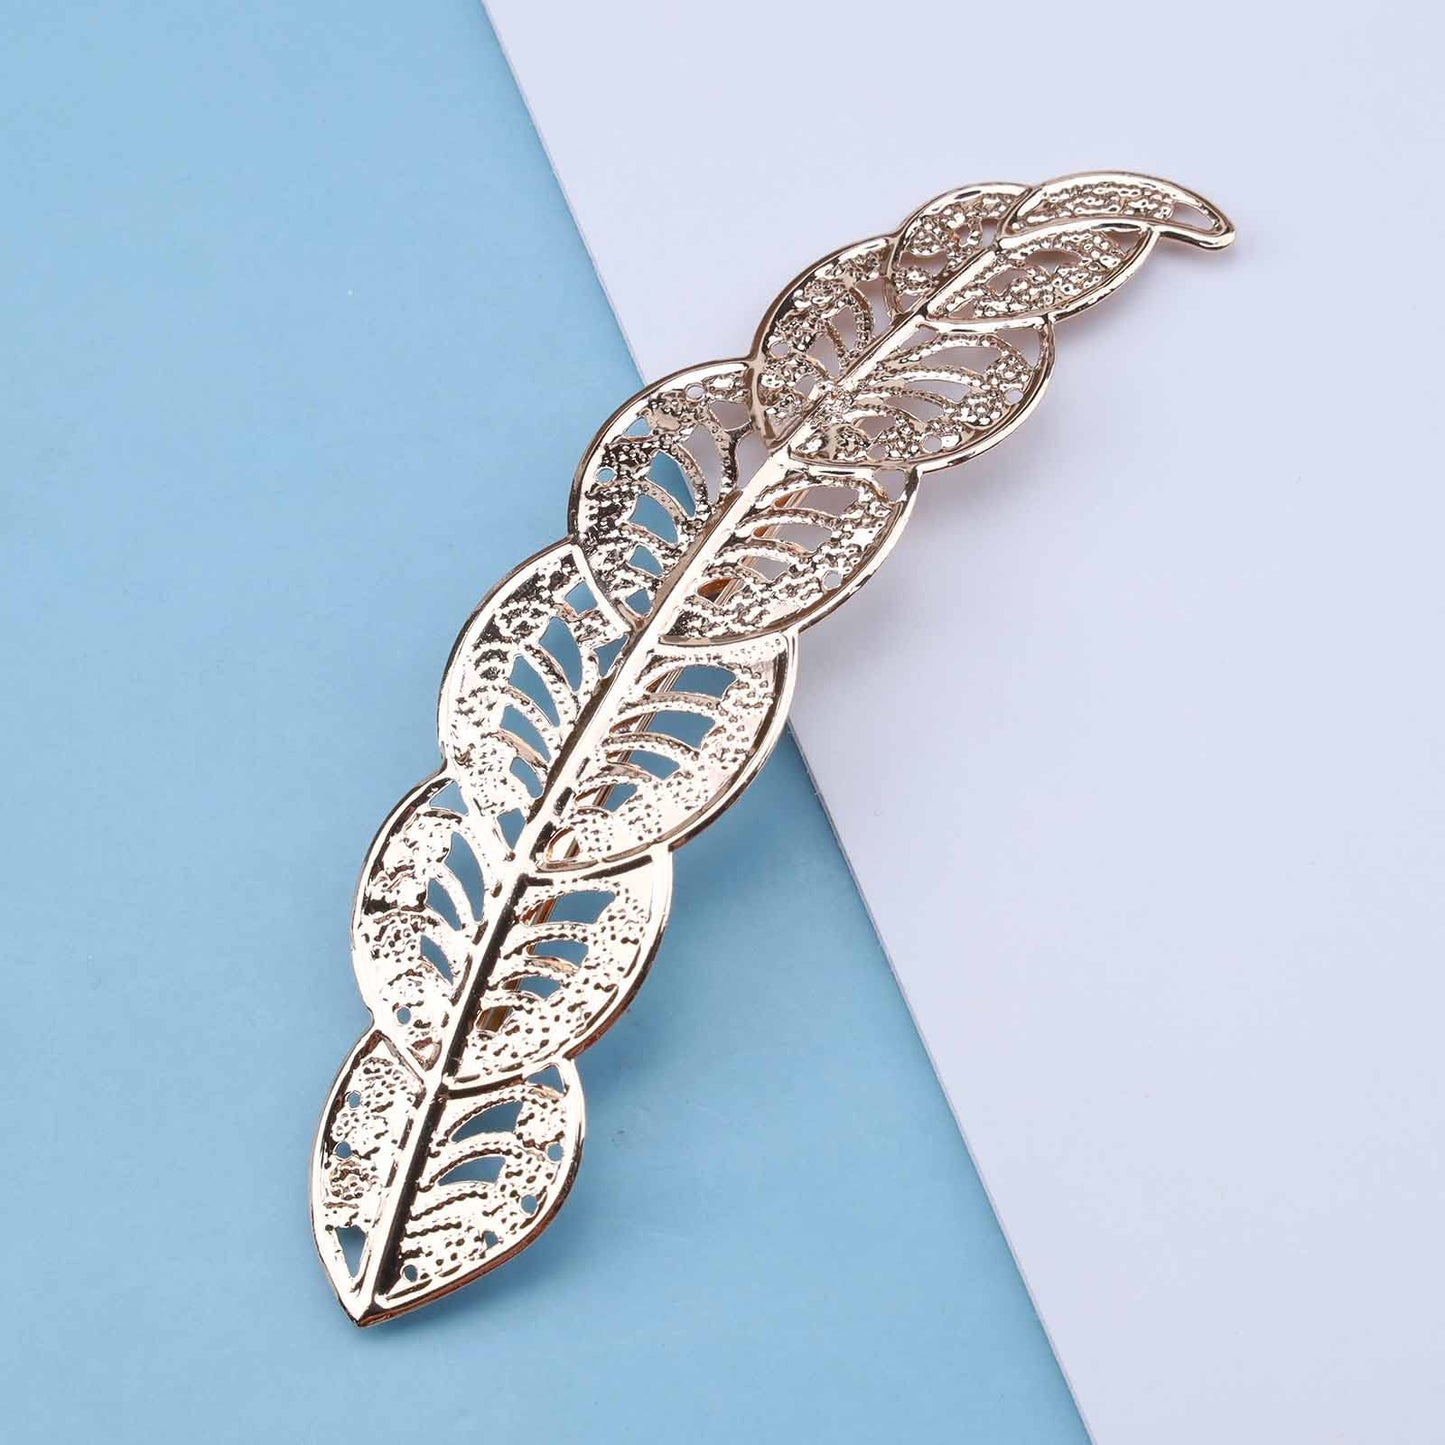 Yheakne Boho Leaf Hair Clip Metal Leaf Hairclips Barrette Gold Vintage Hair Barrette Pins Decorative Bobby Pin Alloy Minimalist Hair Accessories for Women and Girls Gifts (Gold)